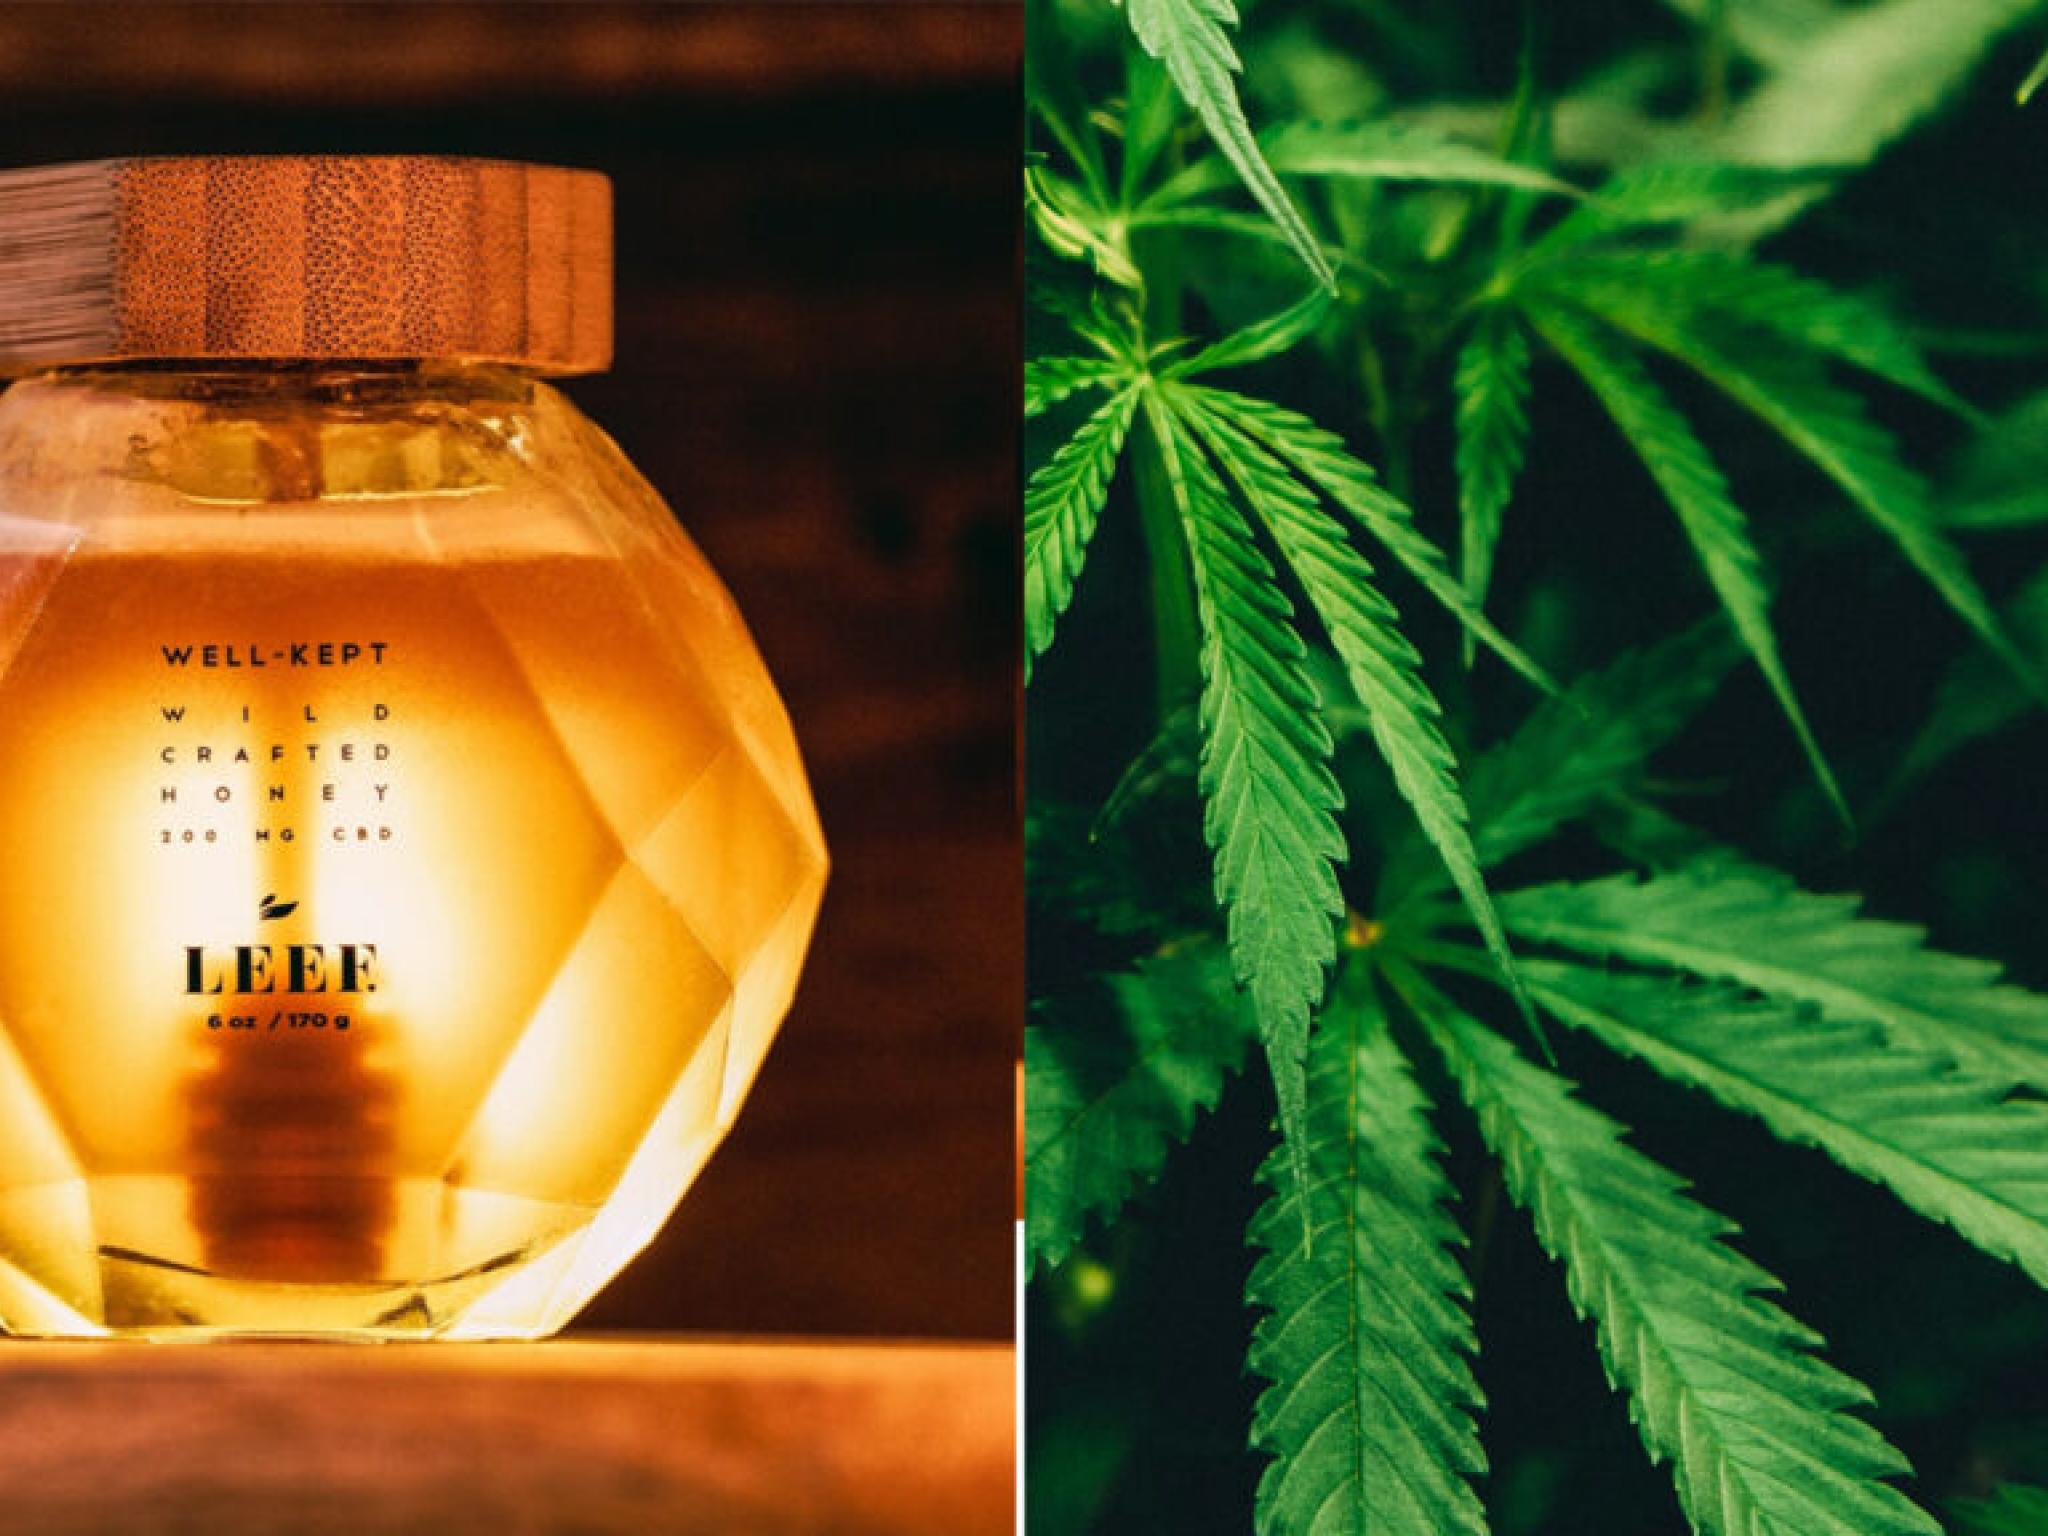  eco-friendly-cbd-honey-hits-shelves-leef-brands-sustainable-sweets-for-health-enthusiasts 